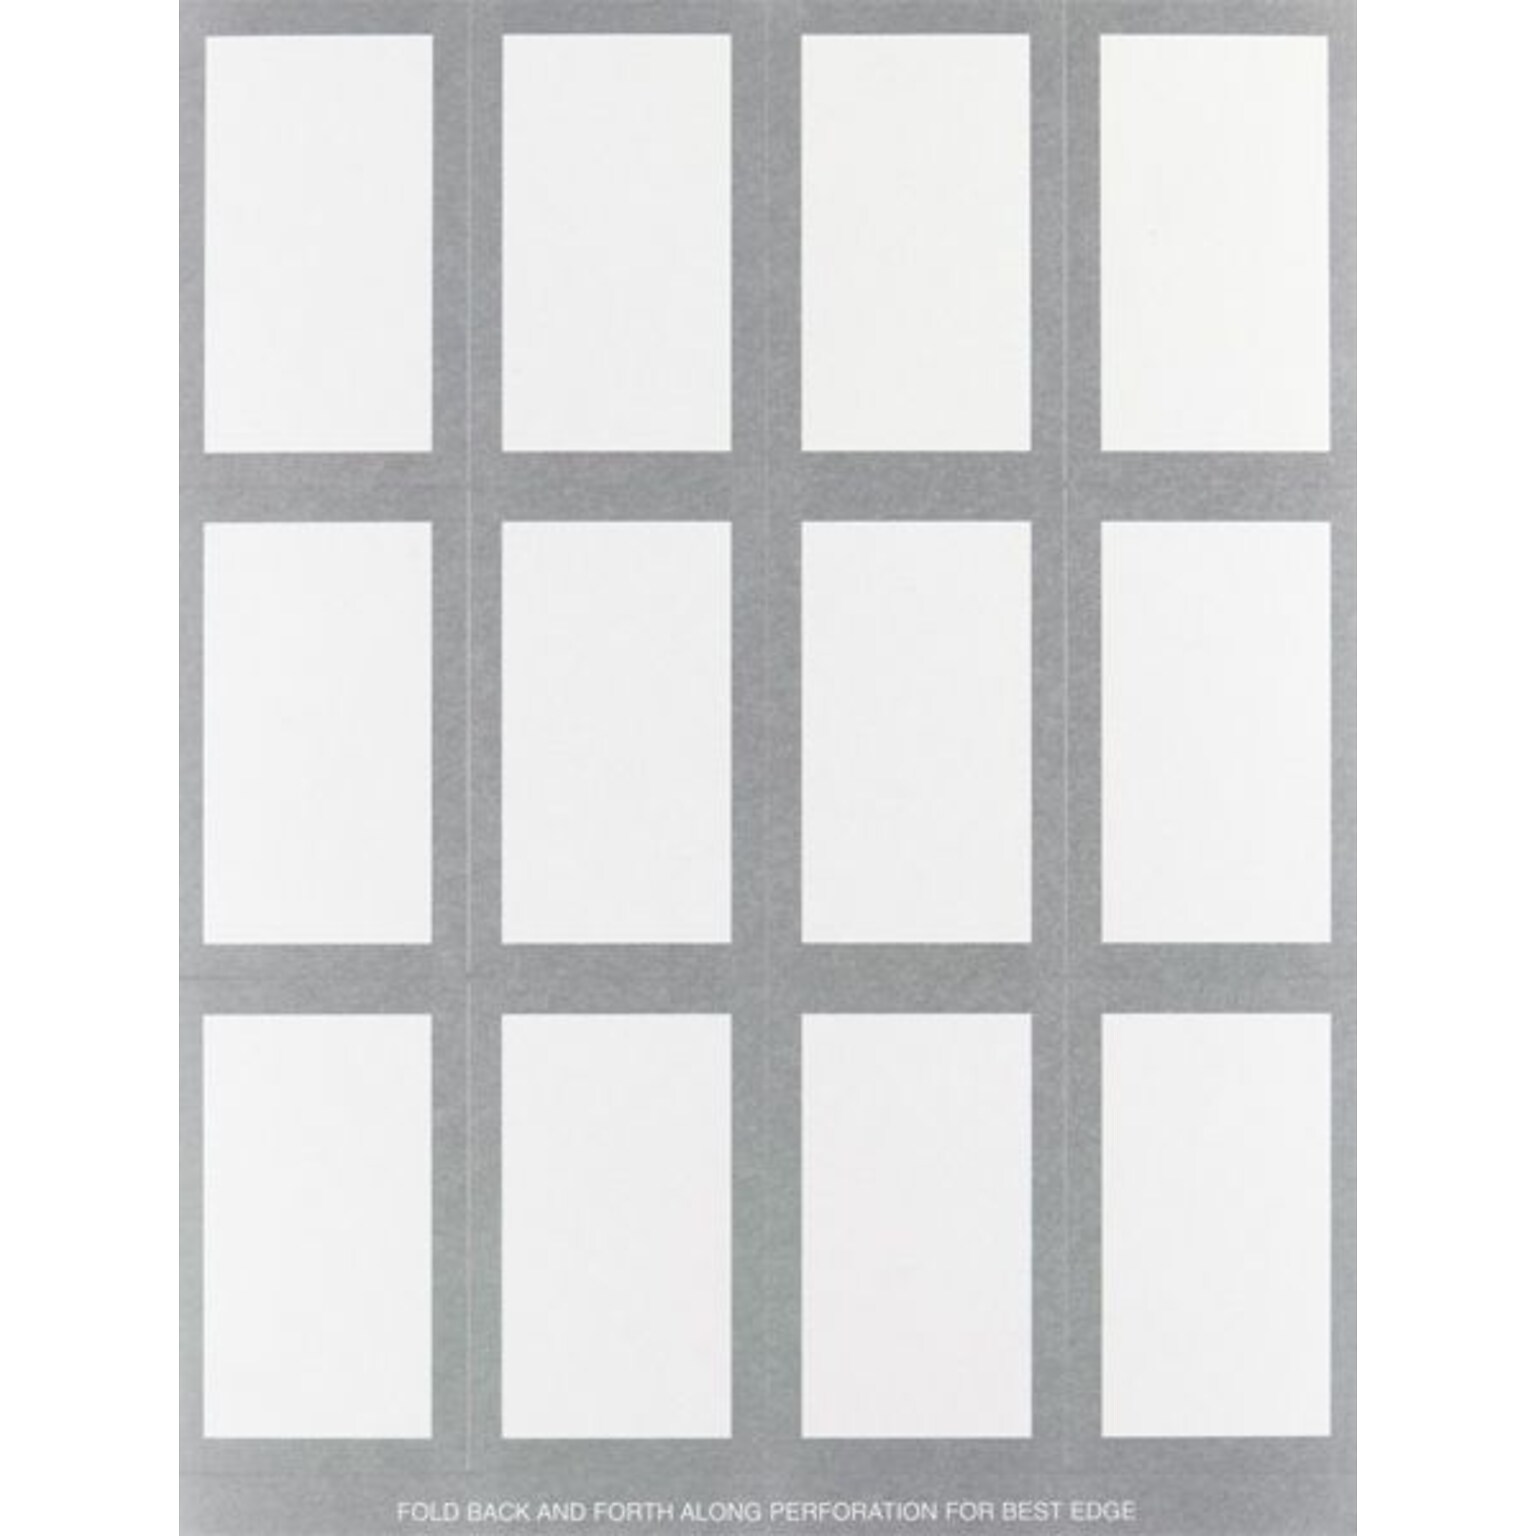 Great Papers® Metallic Silver Place Cards, 60/Pack